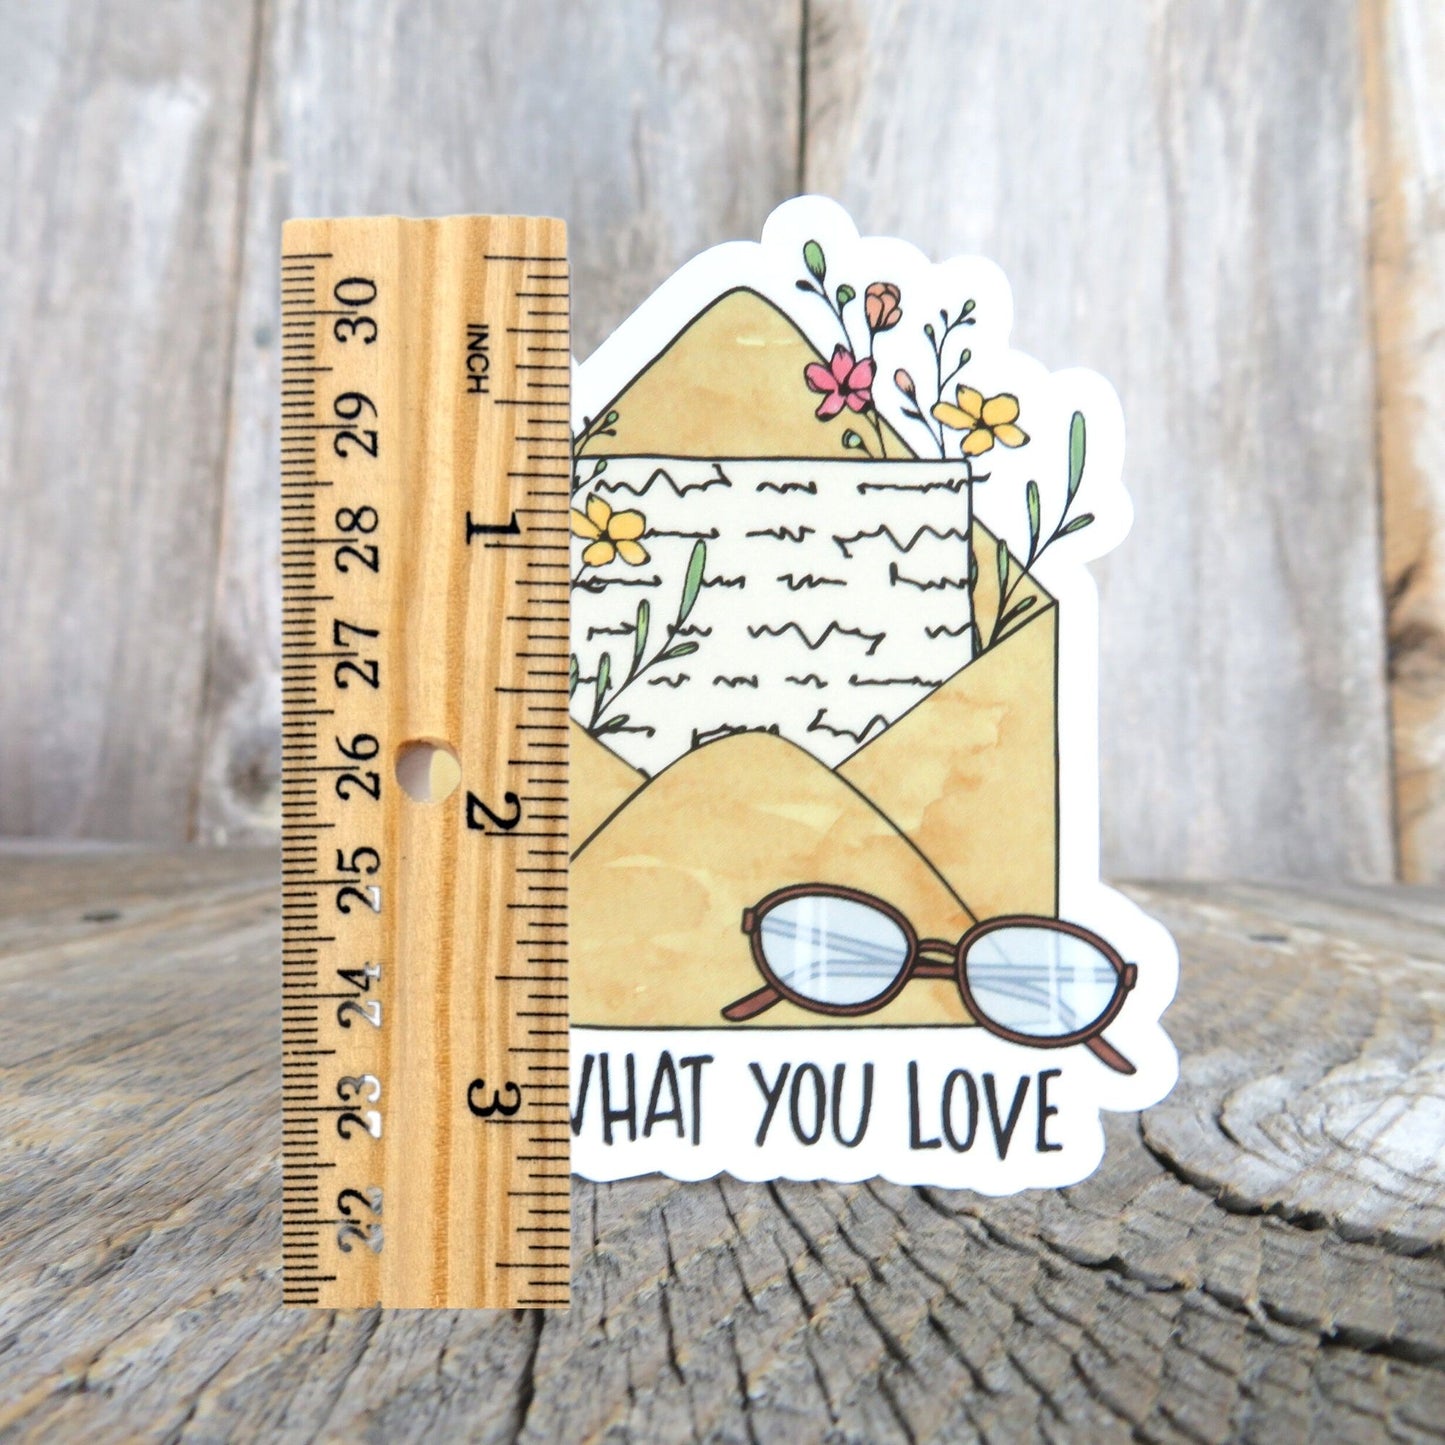 Do What You Love Sticker Book Inspirational Positive Affirmation Waterproof Letter Envelope and Reading Glasses